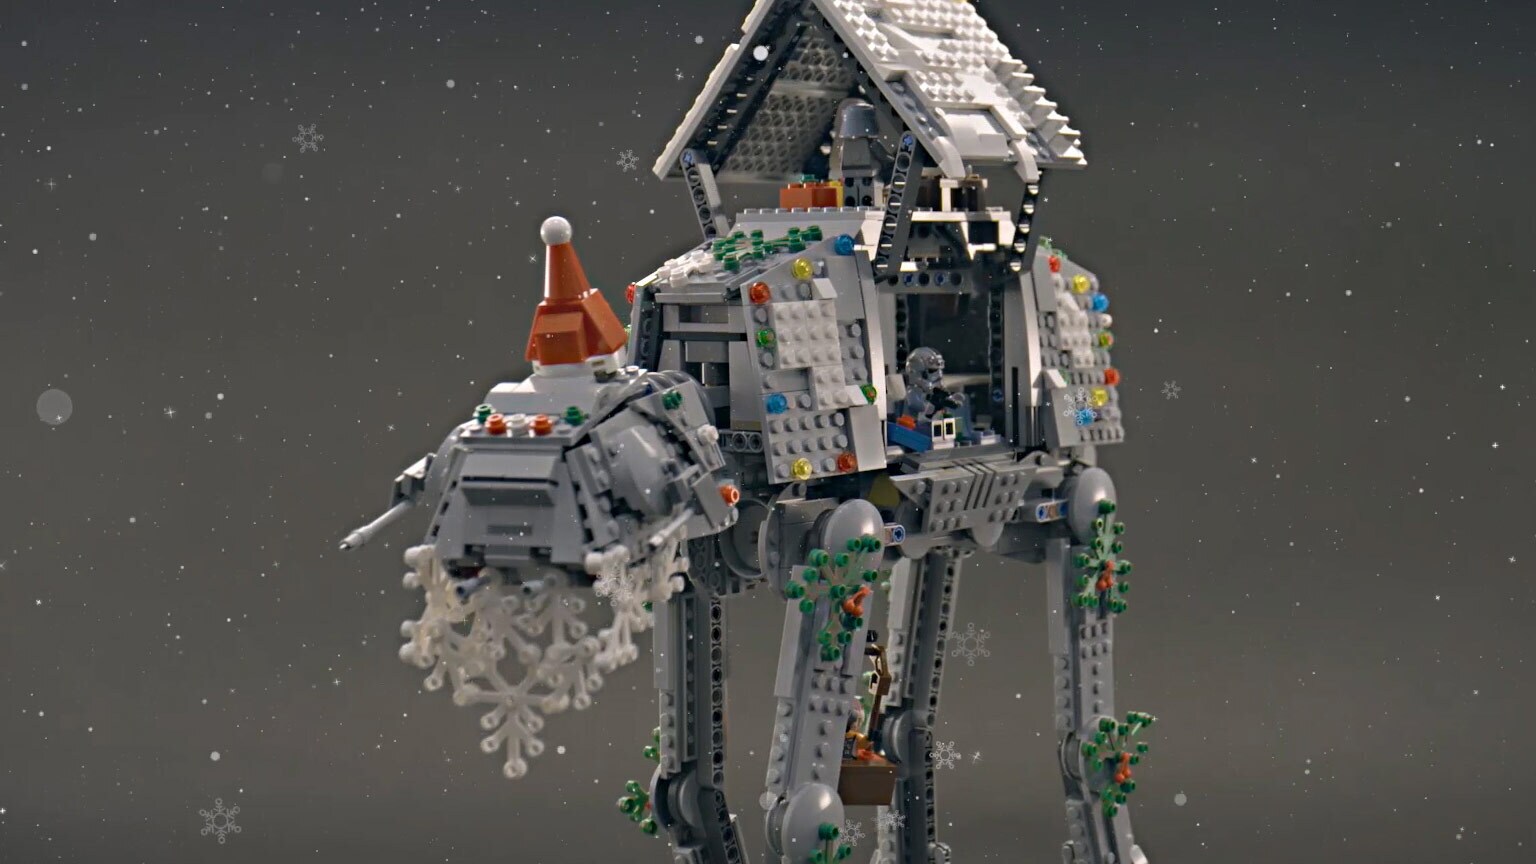 Star Wars: Force for Change, FIRST, and the LEGO® Group Launch “LEGO Star Wars Holiday Contest”